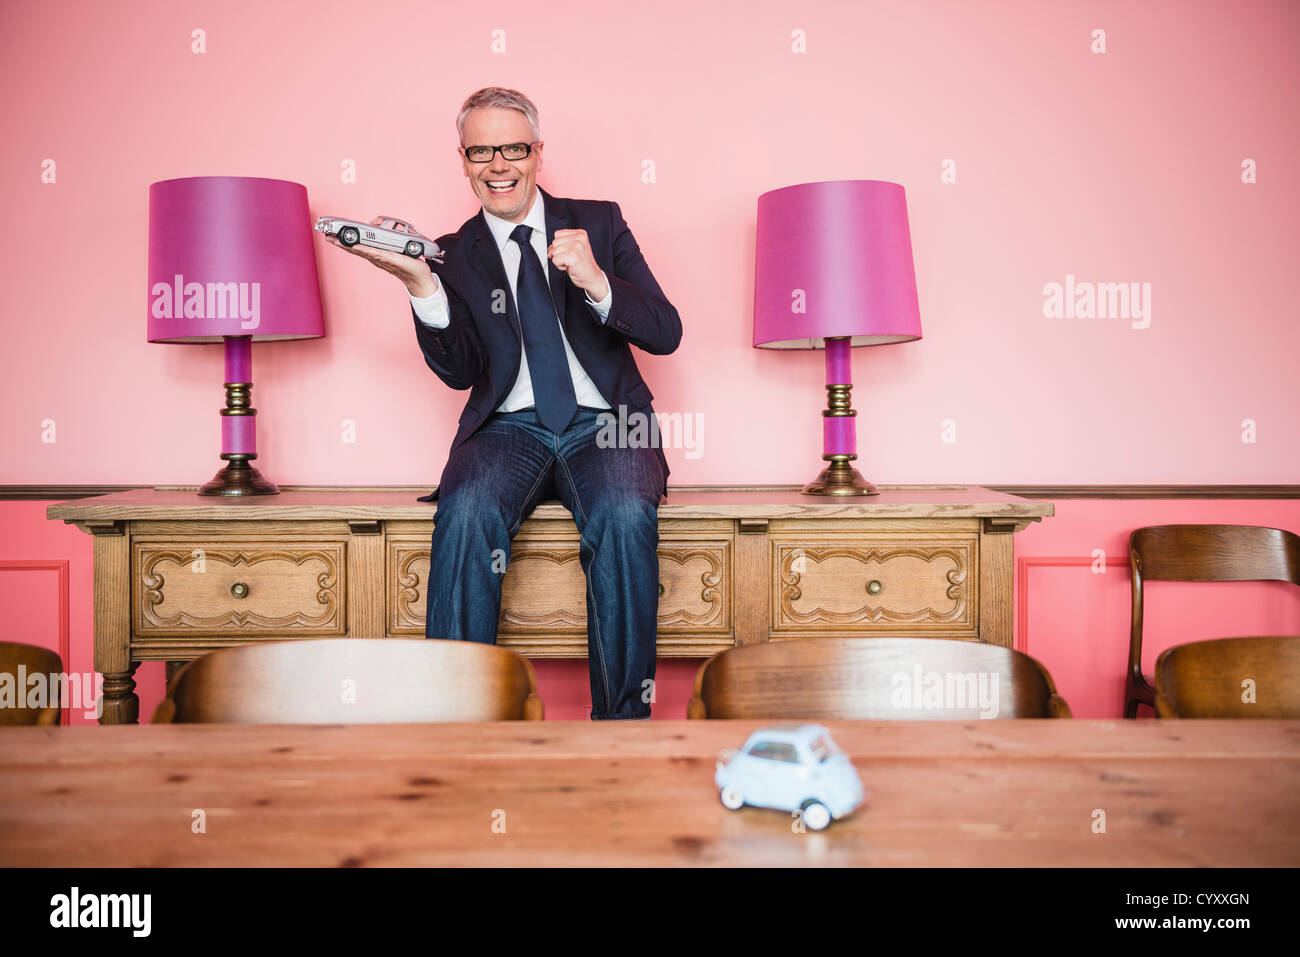 Germany, Stuttgart, Businessman sitting on sideboard with toy car, smiling, portrait Stock Photo